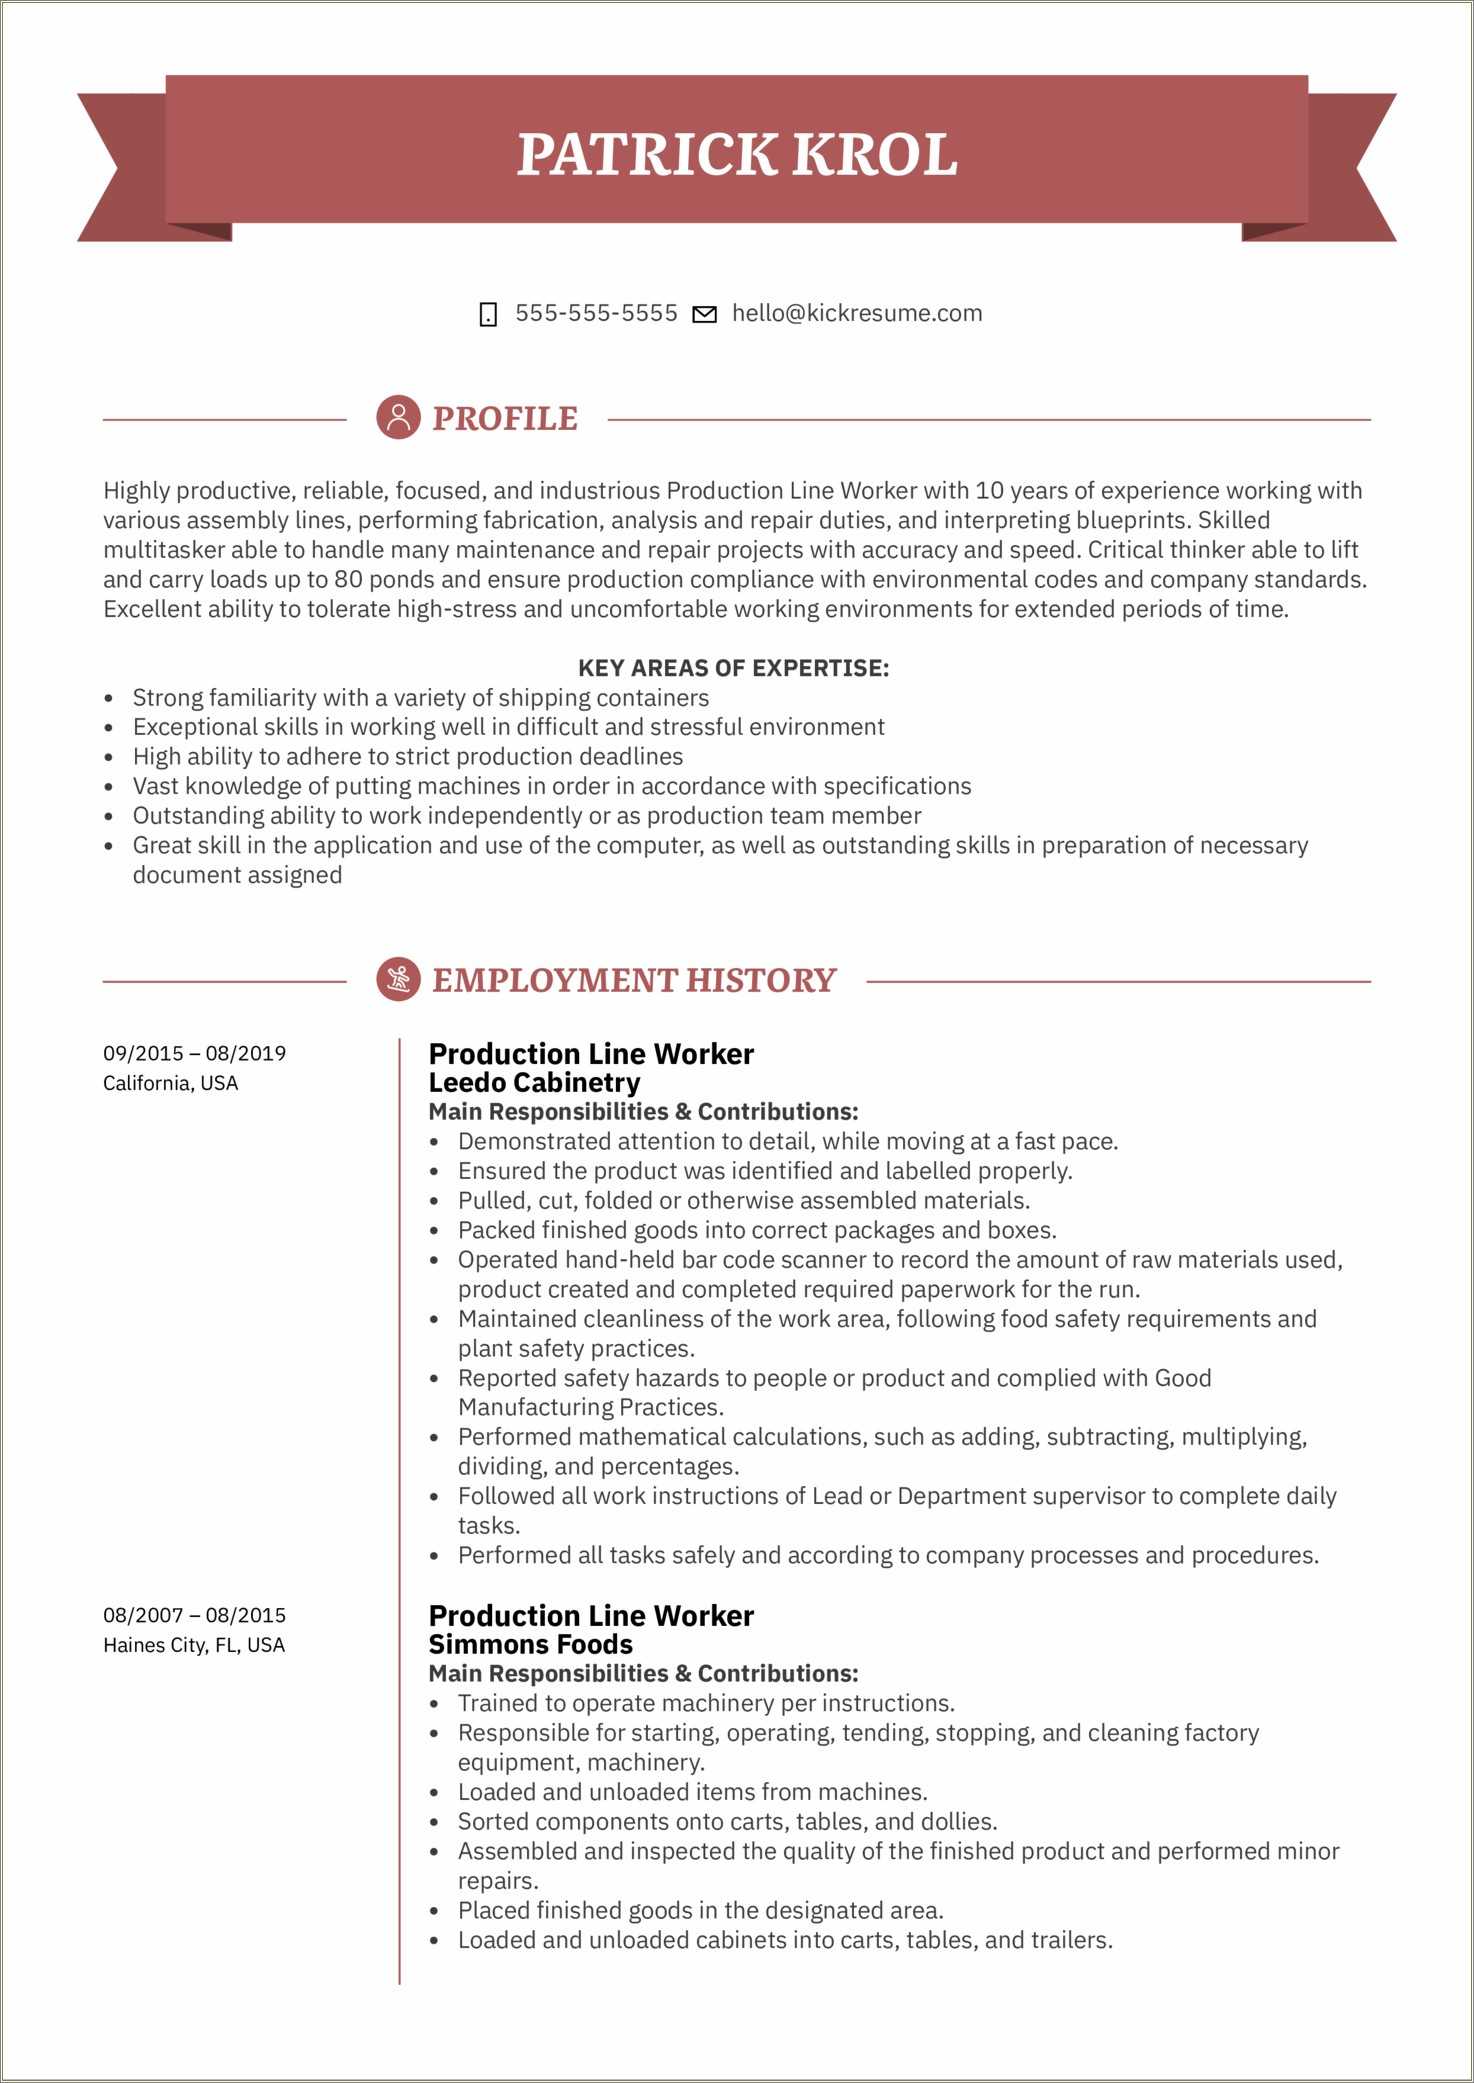 free resume template downloads yahoo answers